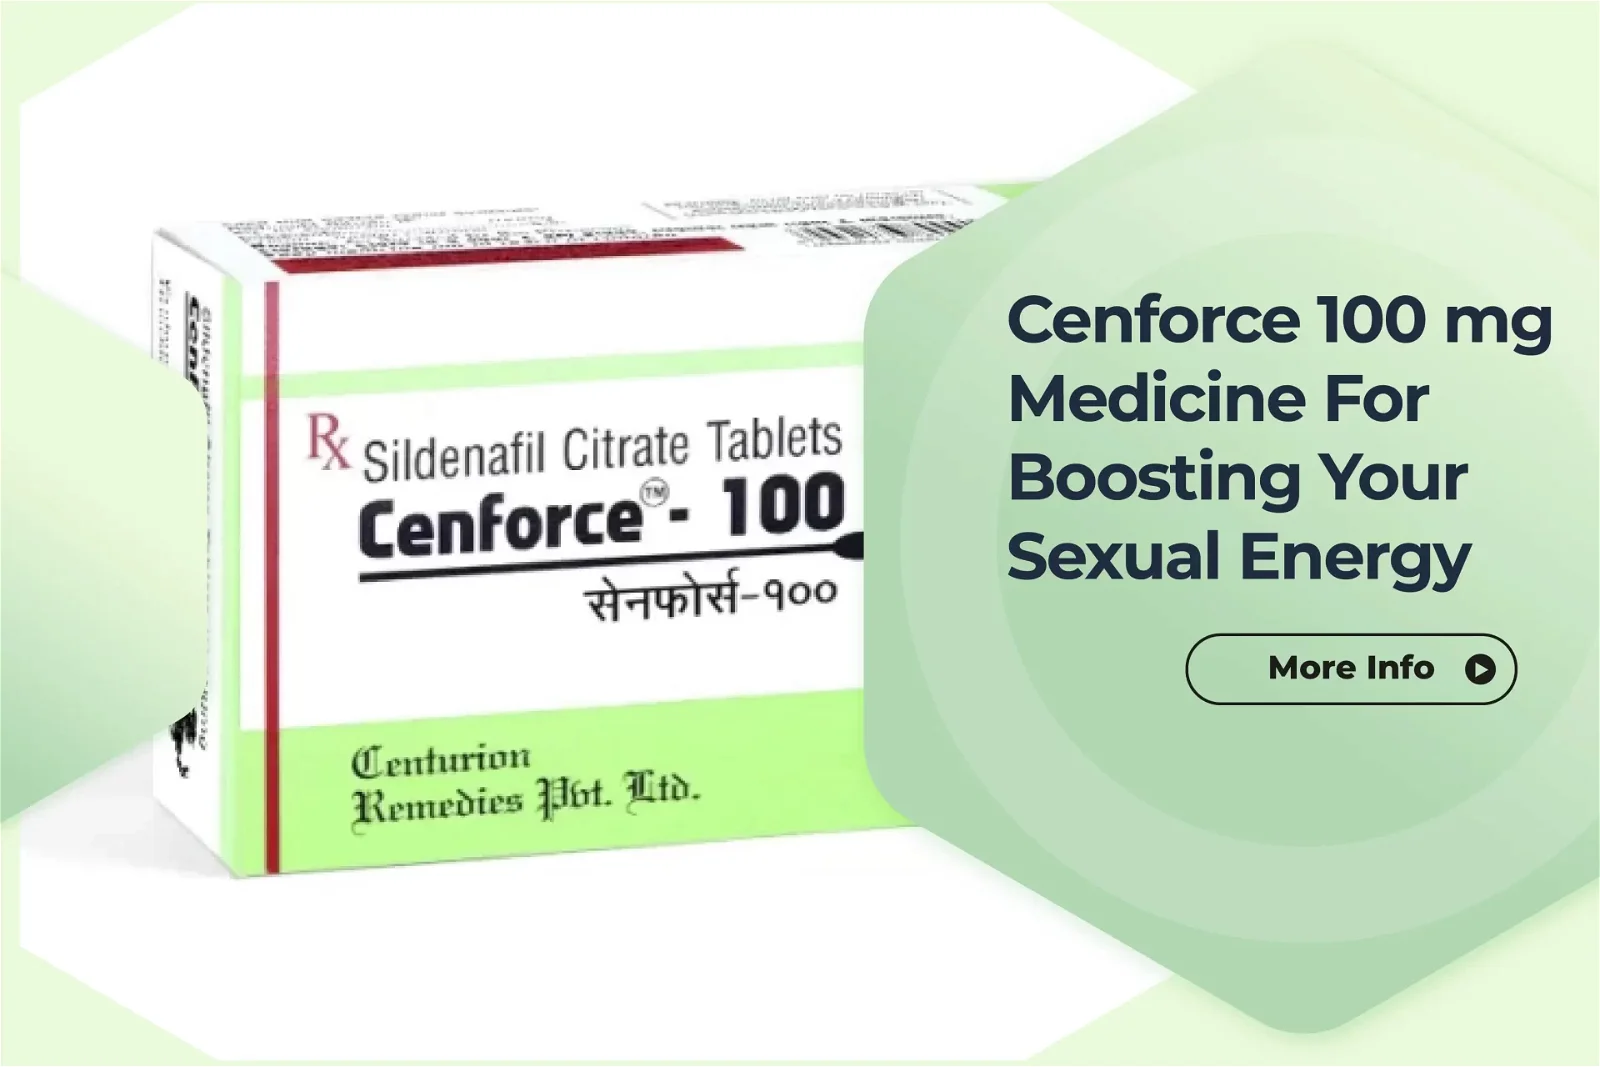 Cenforce 100 mg Medicine For Boosting Your Sexual Energy